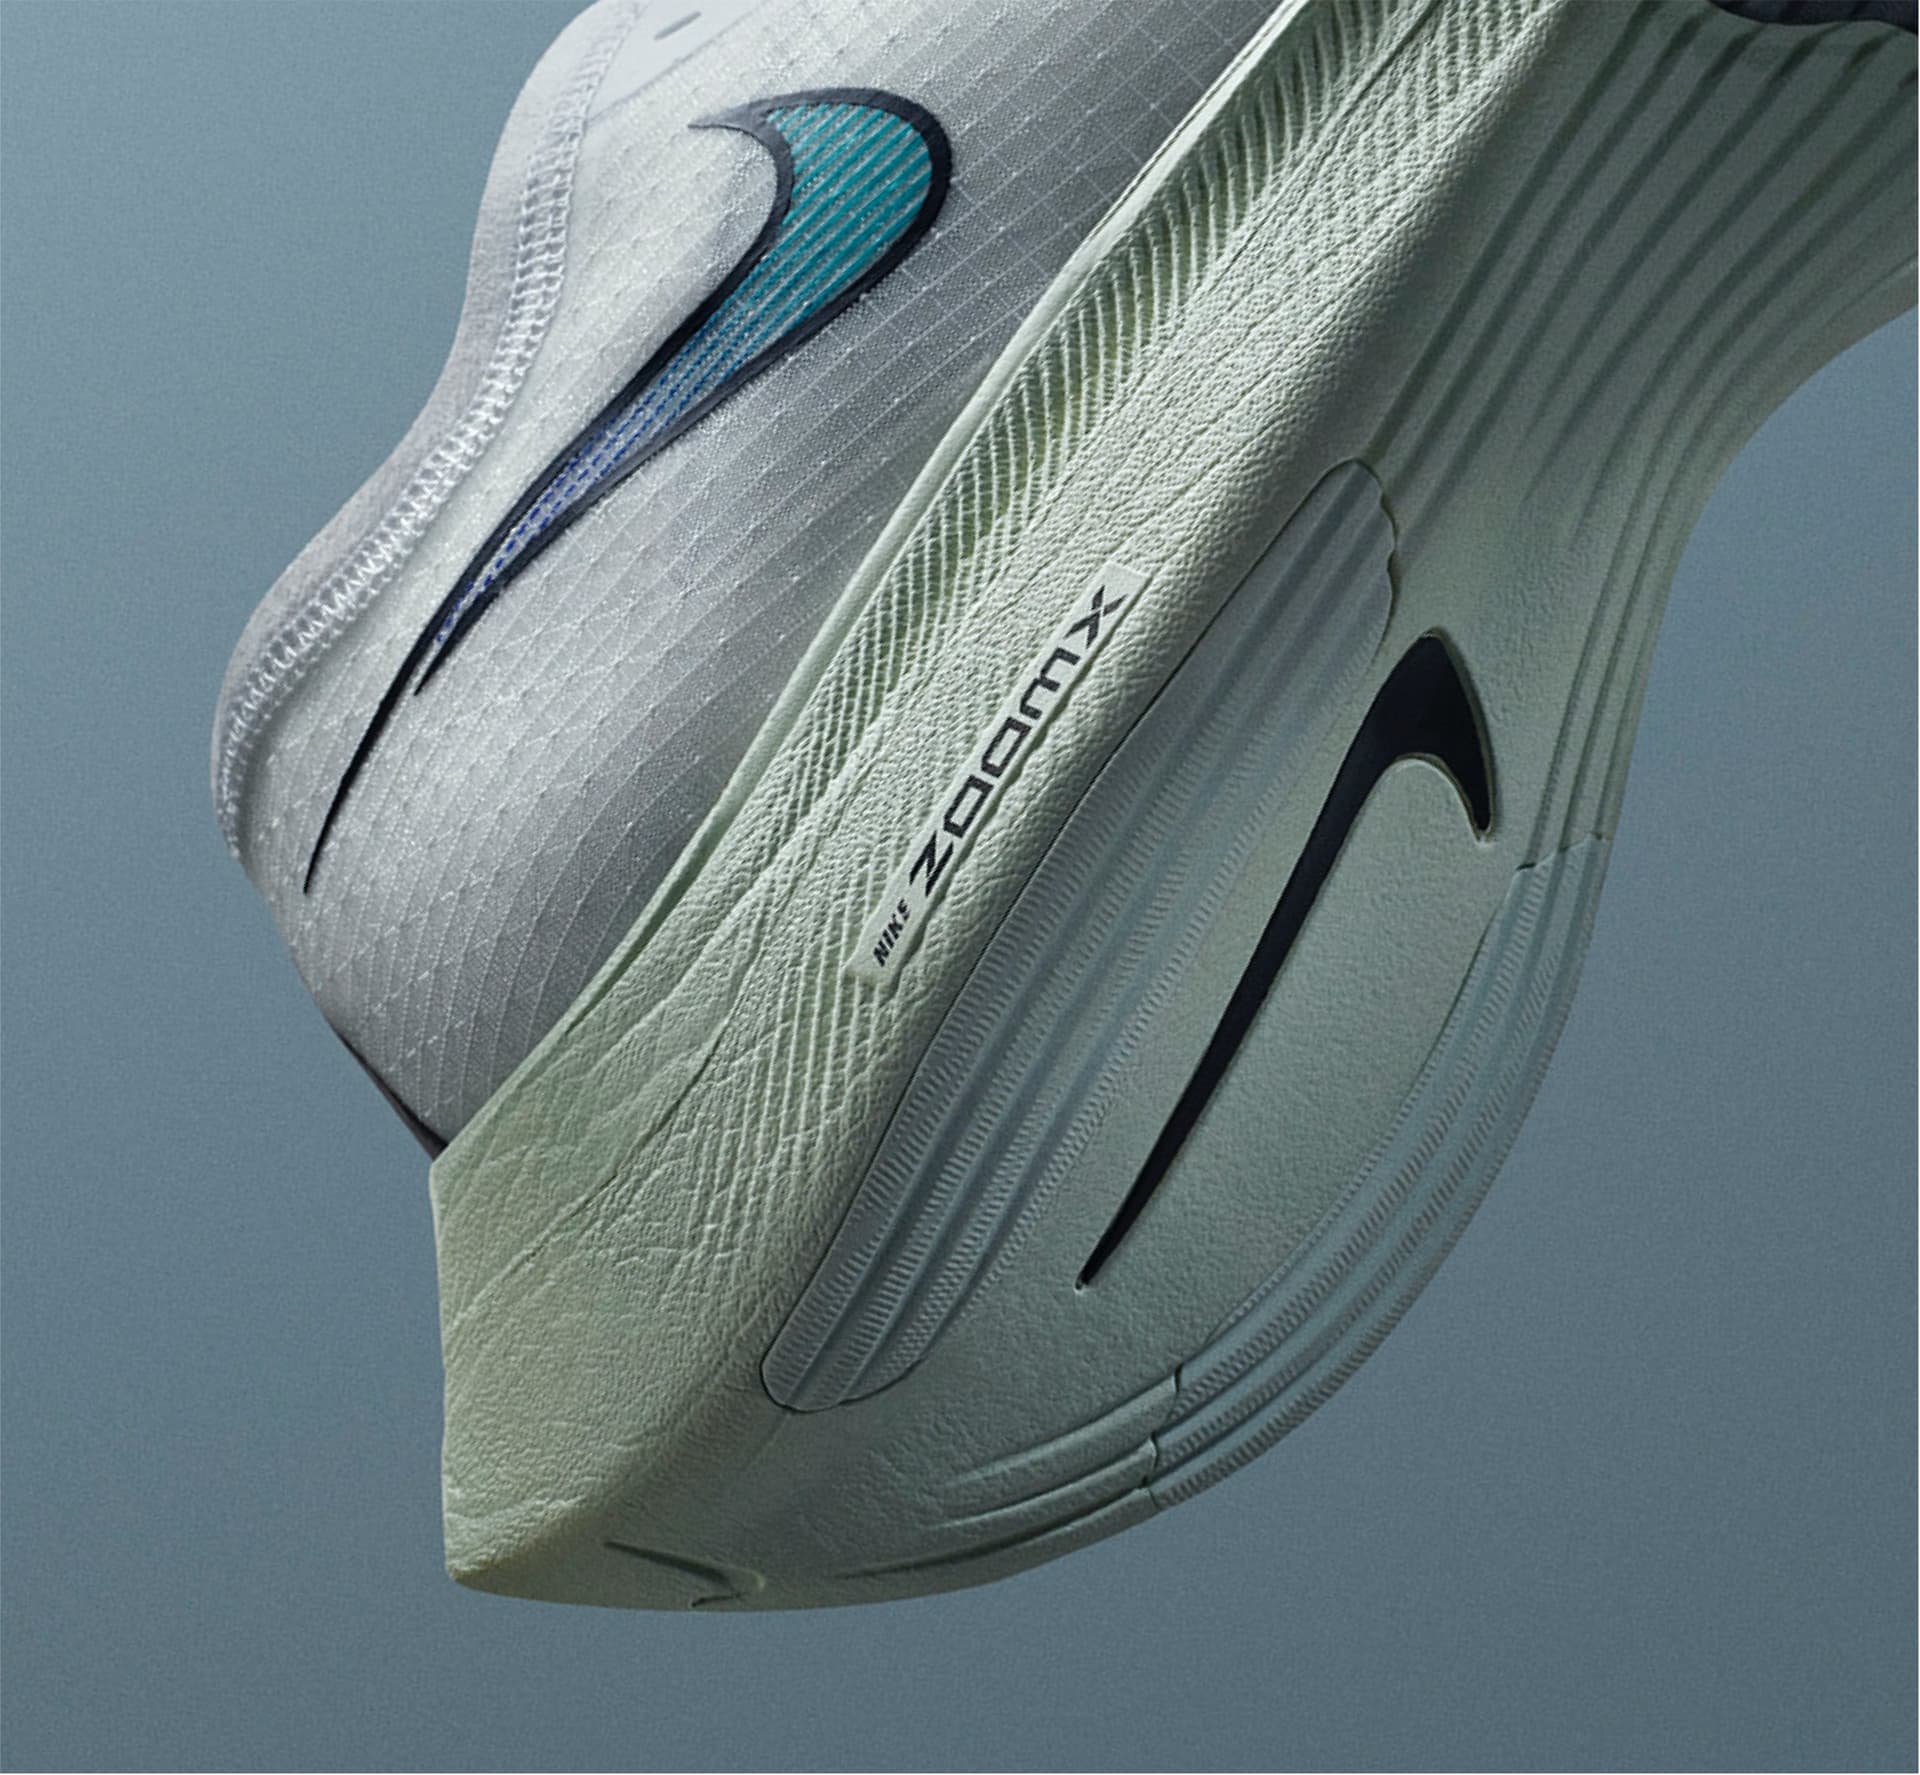 reservoir area Company Nike Vaporfly. Featuring the new Vaporfly NEXT%. Nike.com